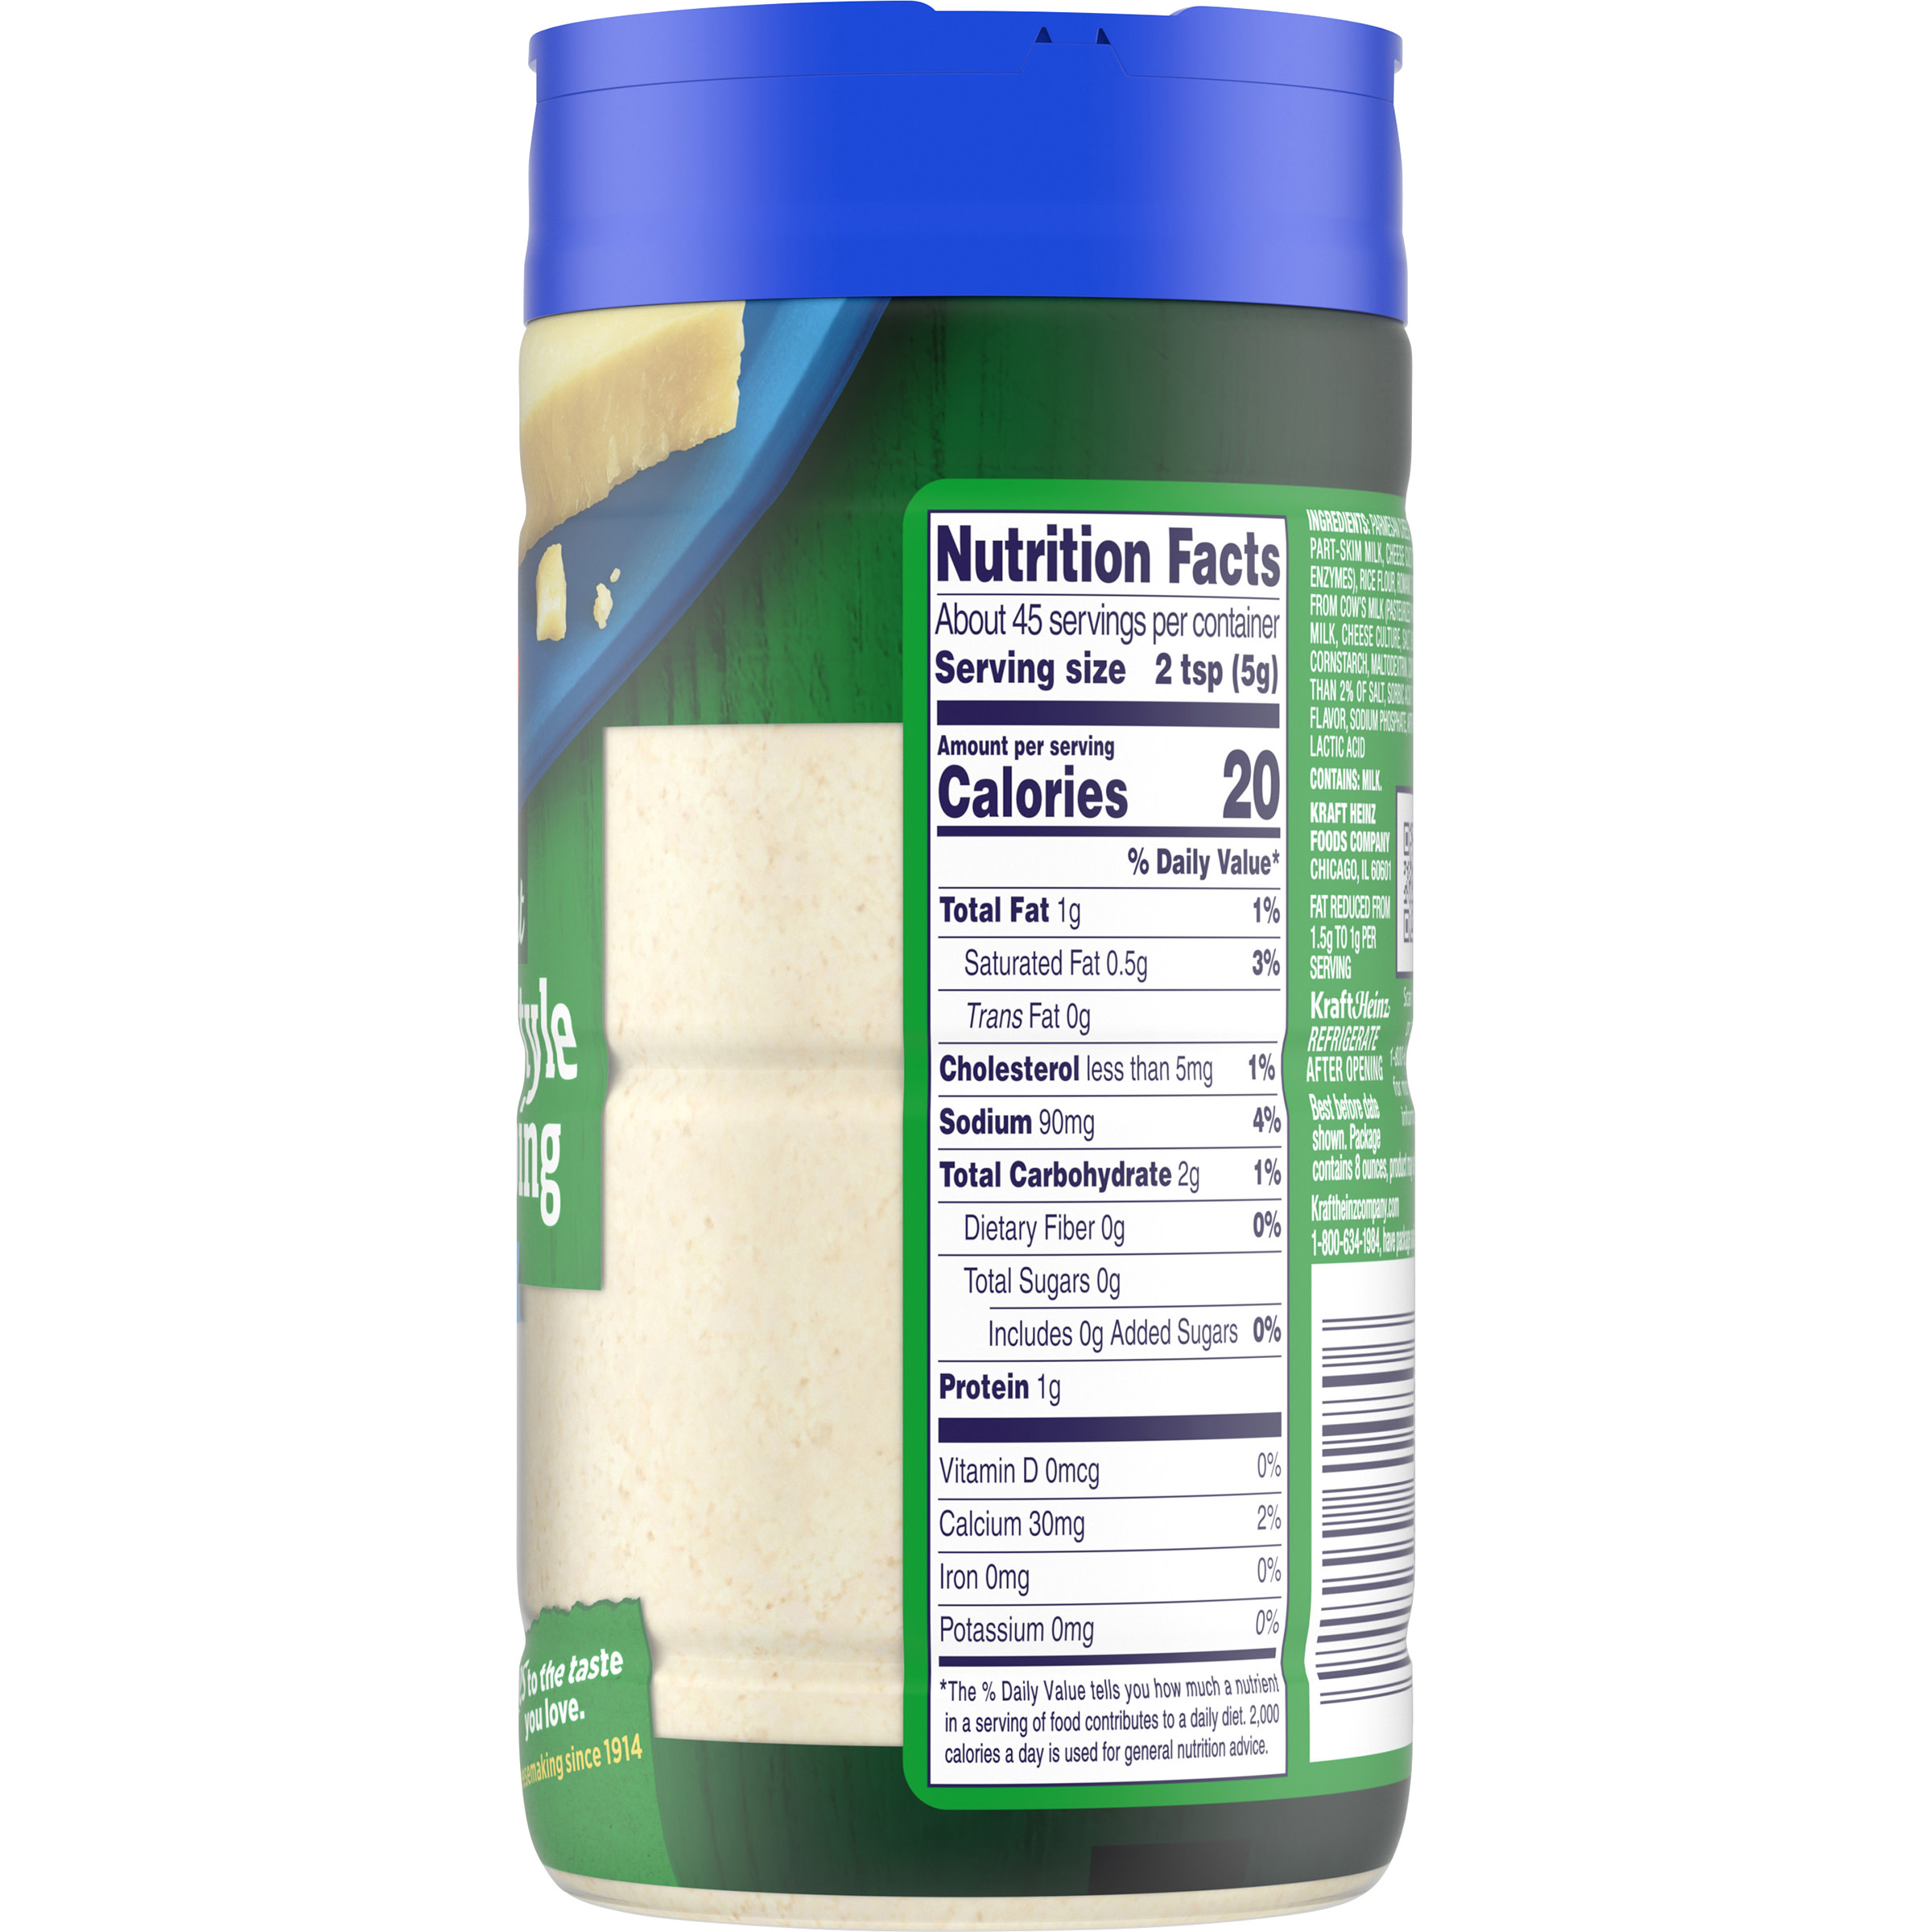 Kraft Parmesan Style Reduced Fat Grated Cheese Topping, 8 oz Shaker - image 5 of 8